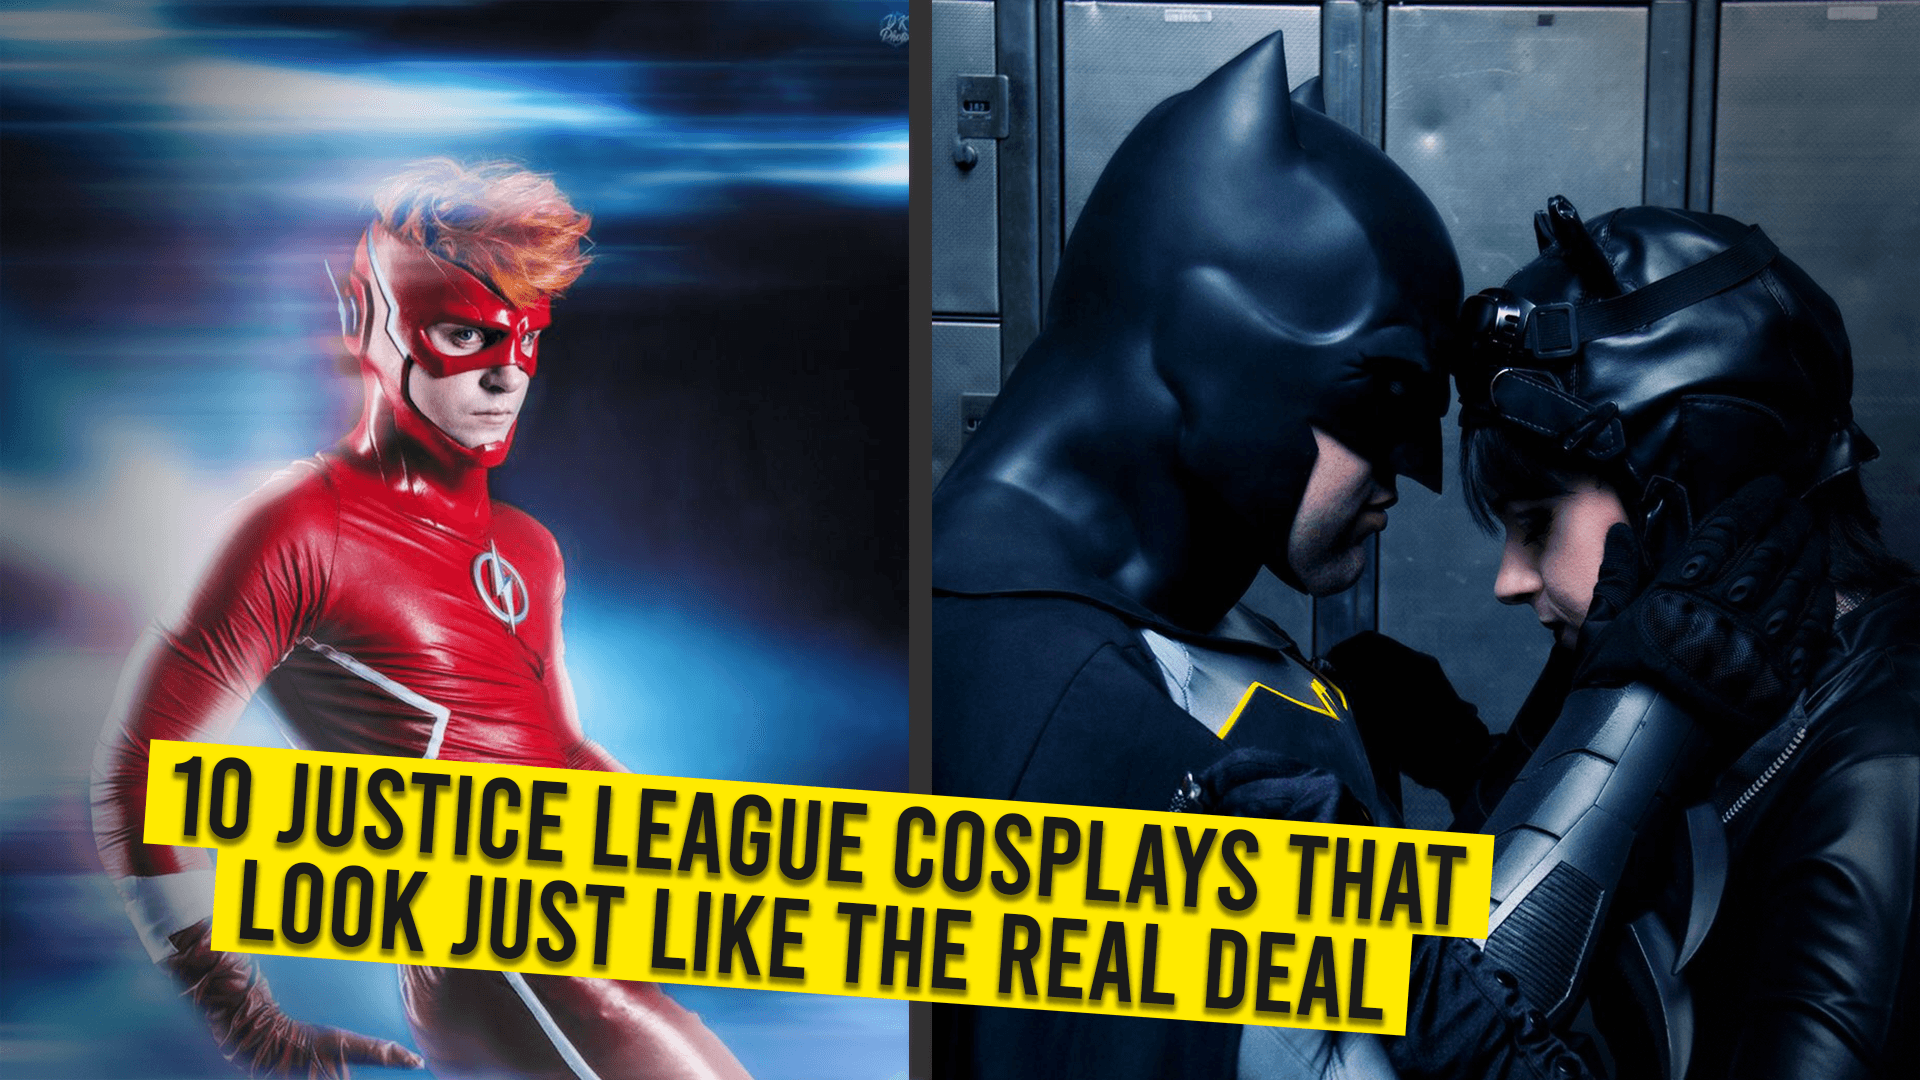 10 Justice League Cosplays That Look Just Like The Real Deal